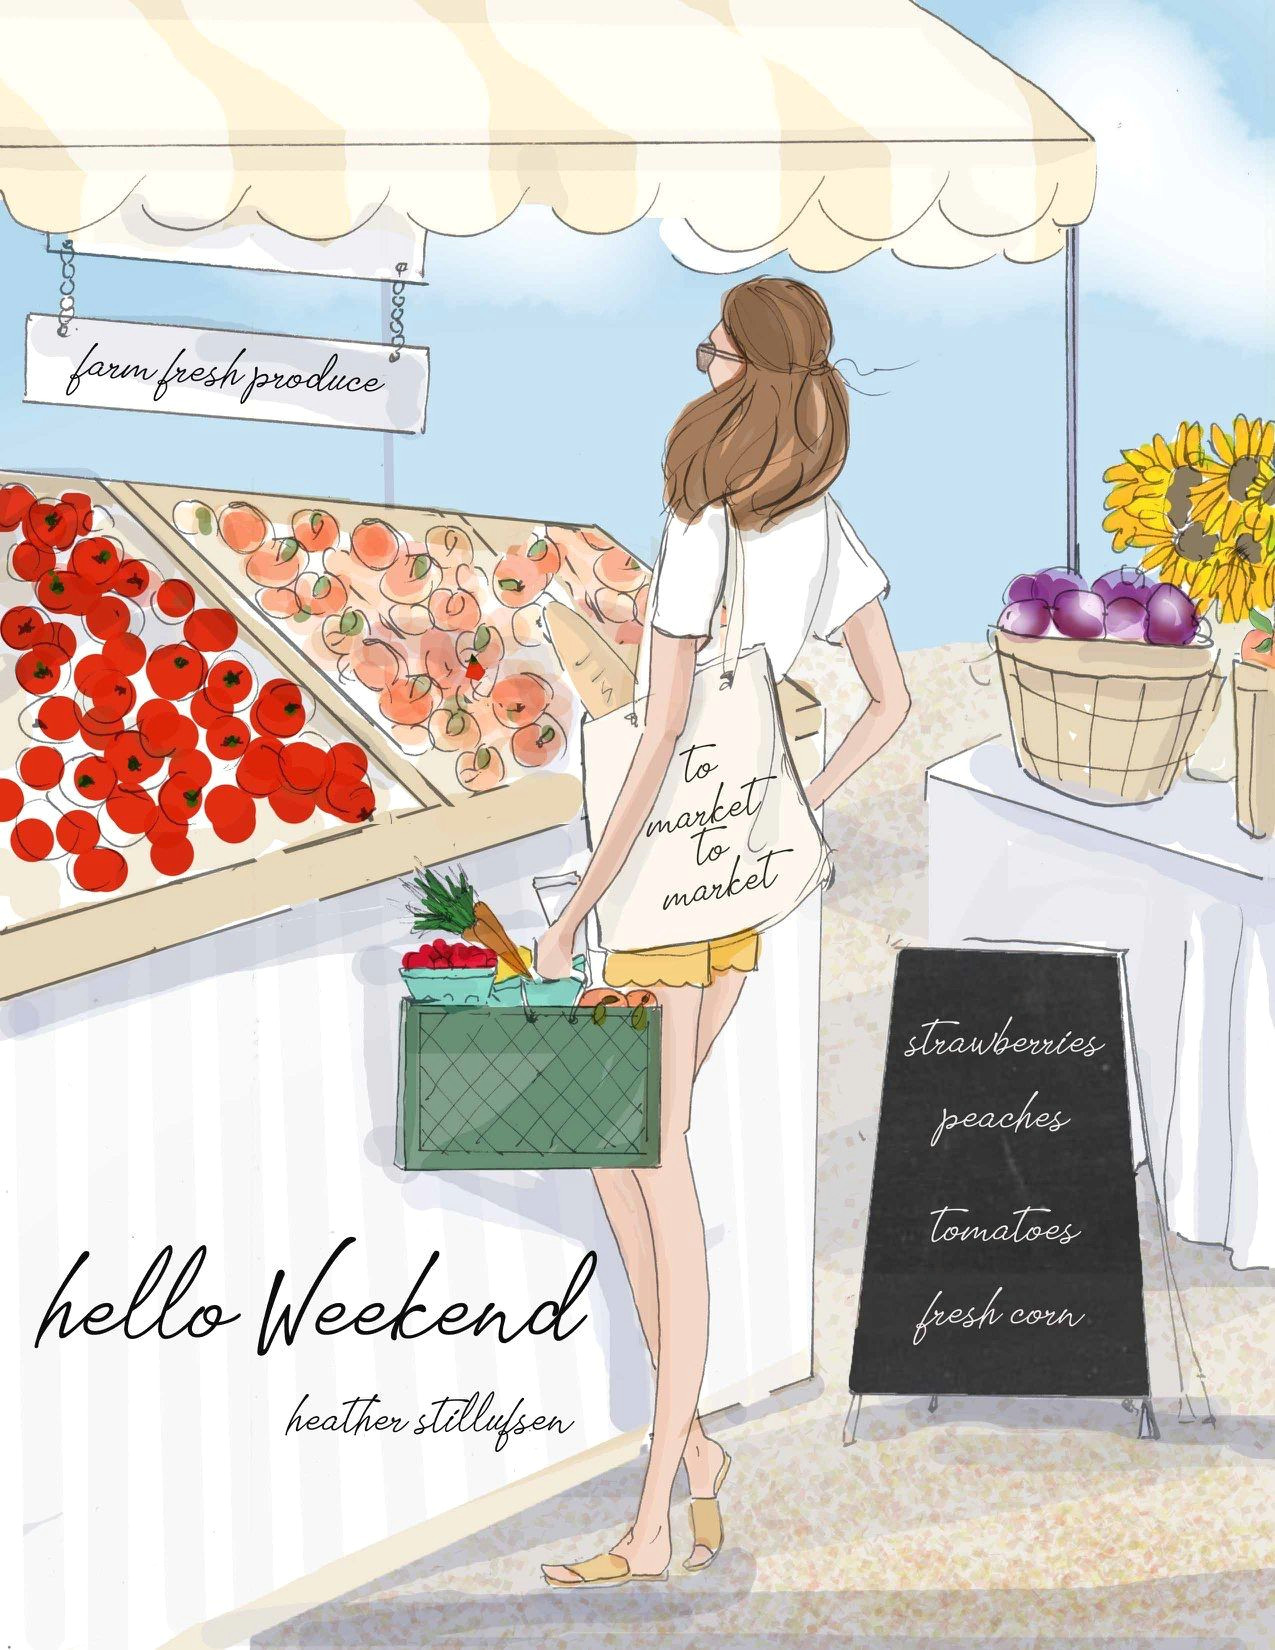 Market Drawing Of A Girl to Market to Market Summer Time Pinterest Hello Weekend